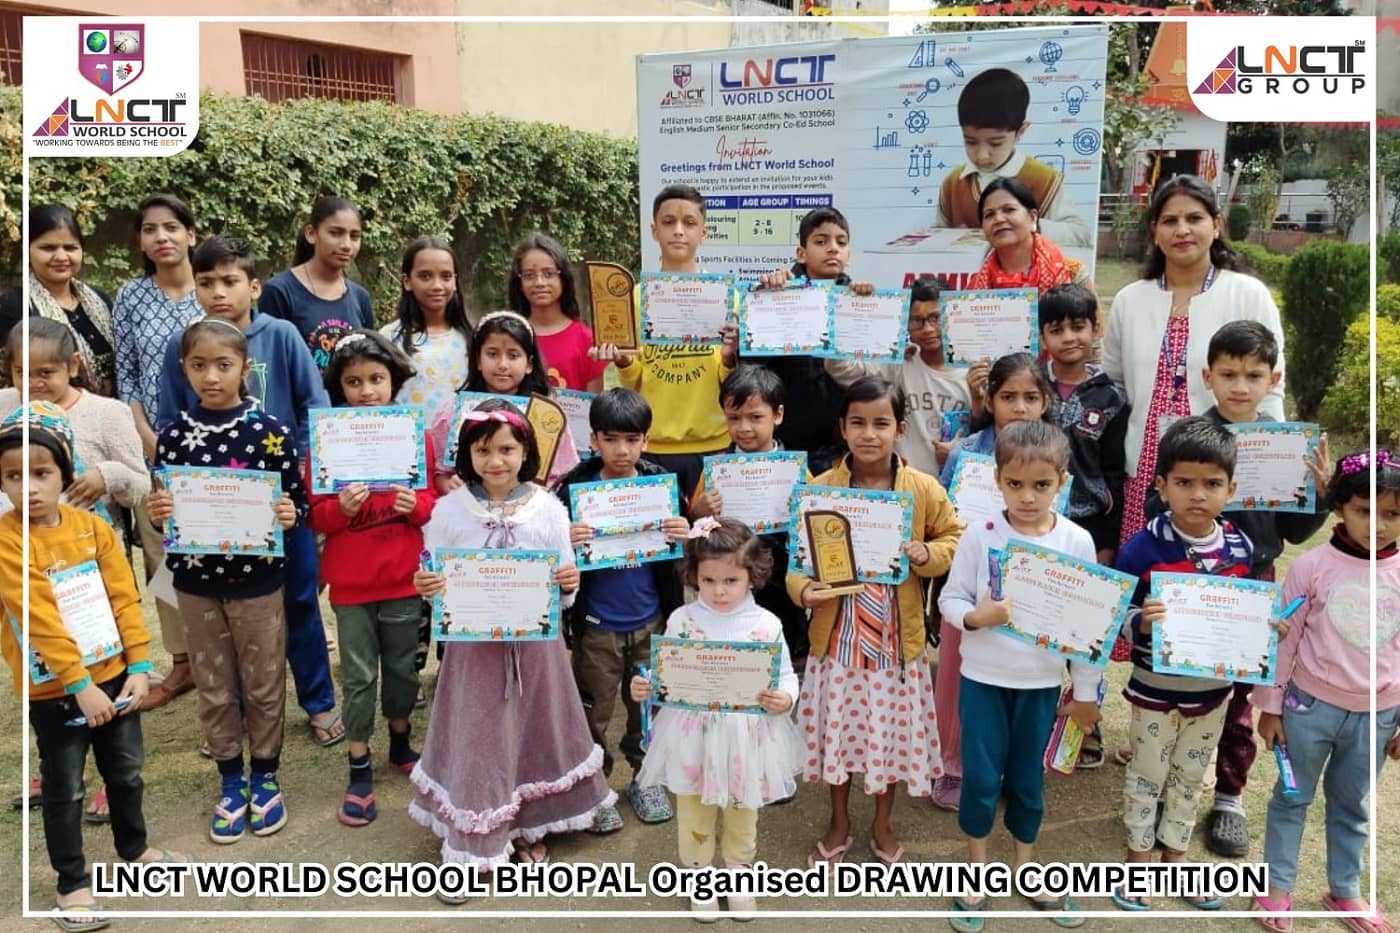 LNCT WORLD SCHOOL  organised DRAWING COMPETITION  in residential campus  INDUS PARK ,THE HOMES